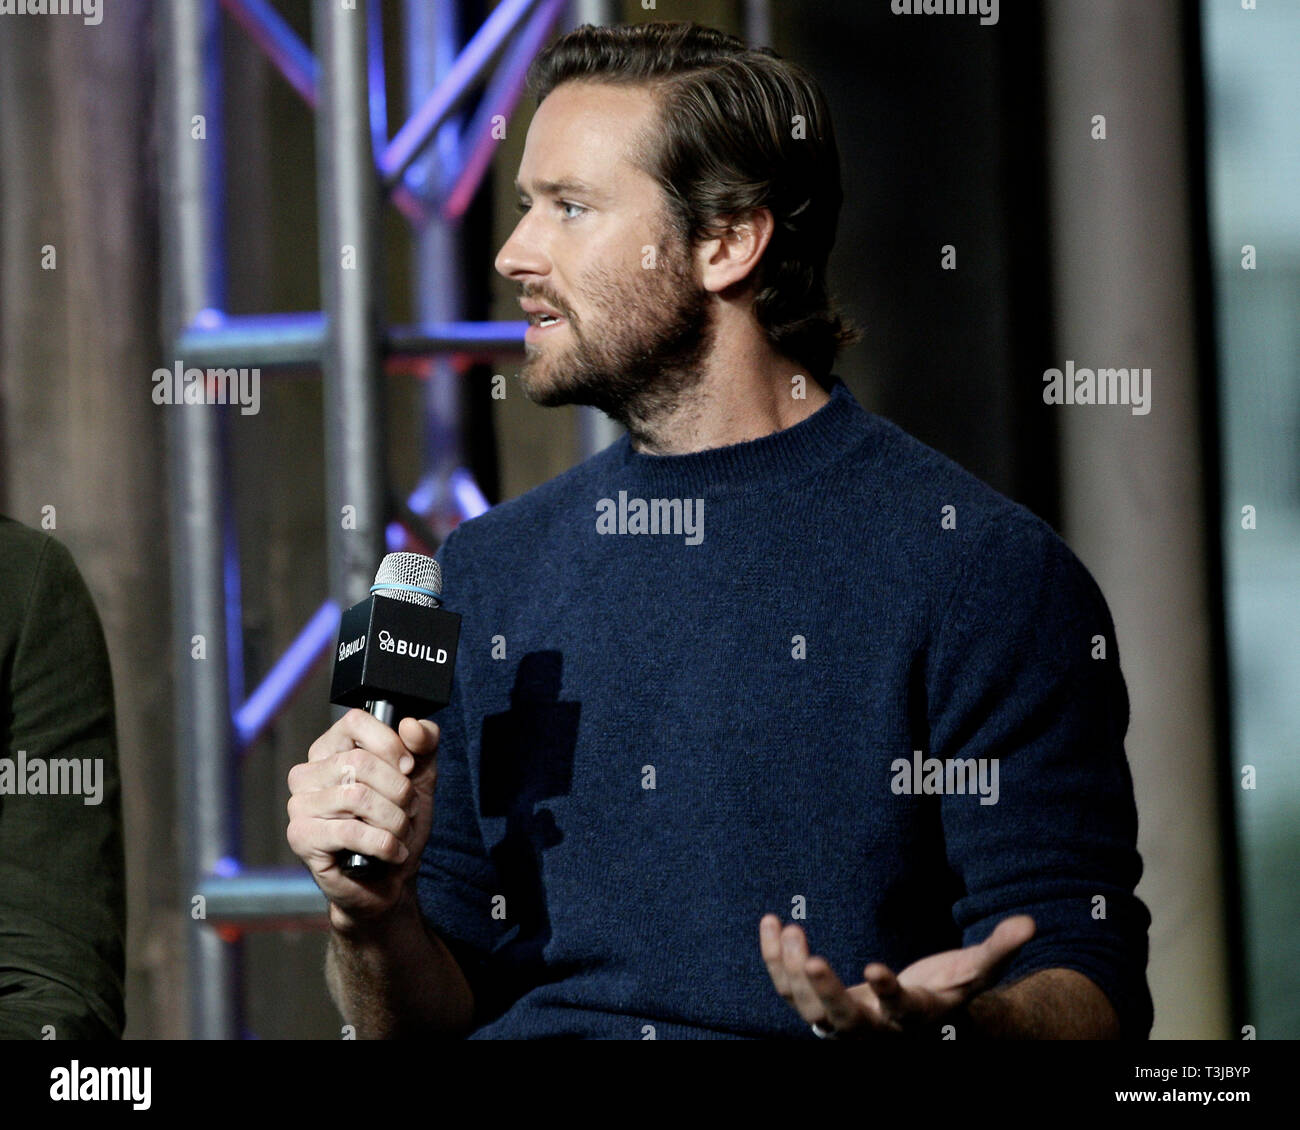 New York, USA. 05 Oct, 2016. Armie Hammer at The BUILD Series, discussing  the movie "Birth Of A Nation" at AOL HQ on October 05, 2016 in New York,  NY. Credit: Steve